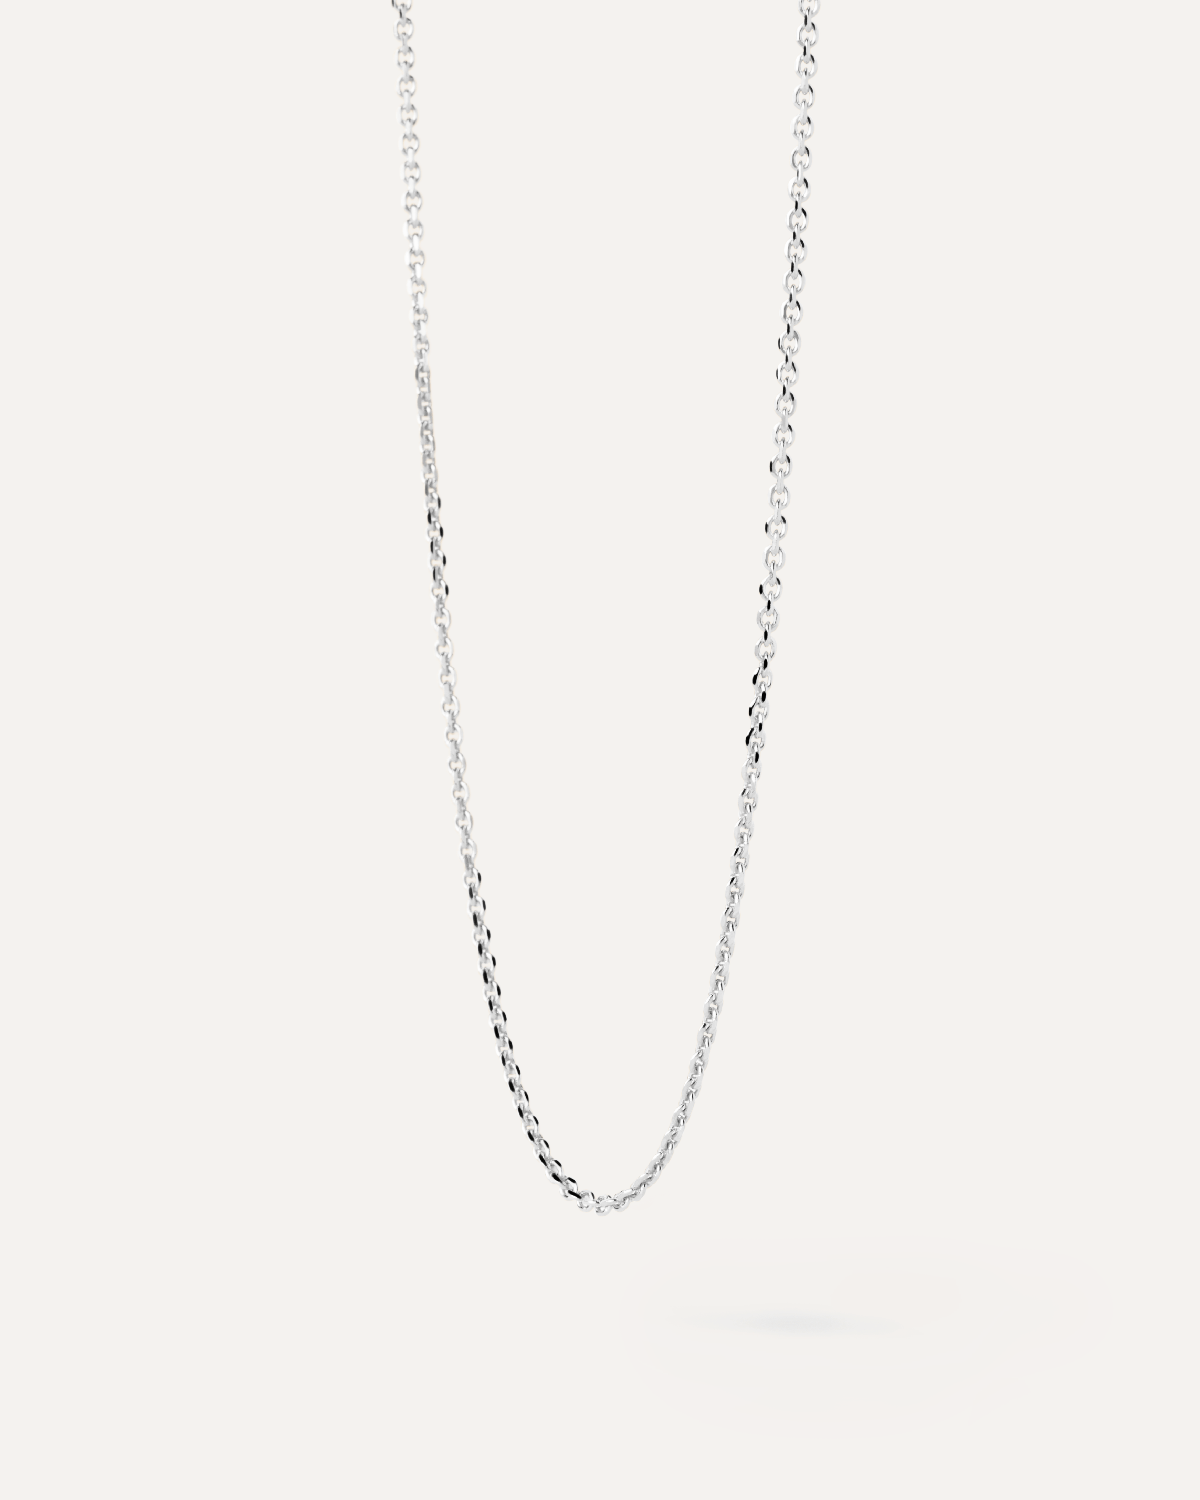 2024 Selection | Essential silver chain necklace. Get the latest arrival from PDPAOLA. Place your order safely and get this Best Seller. Free Shipping.